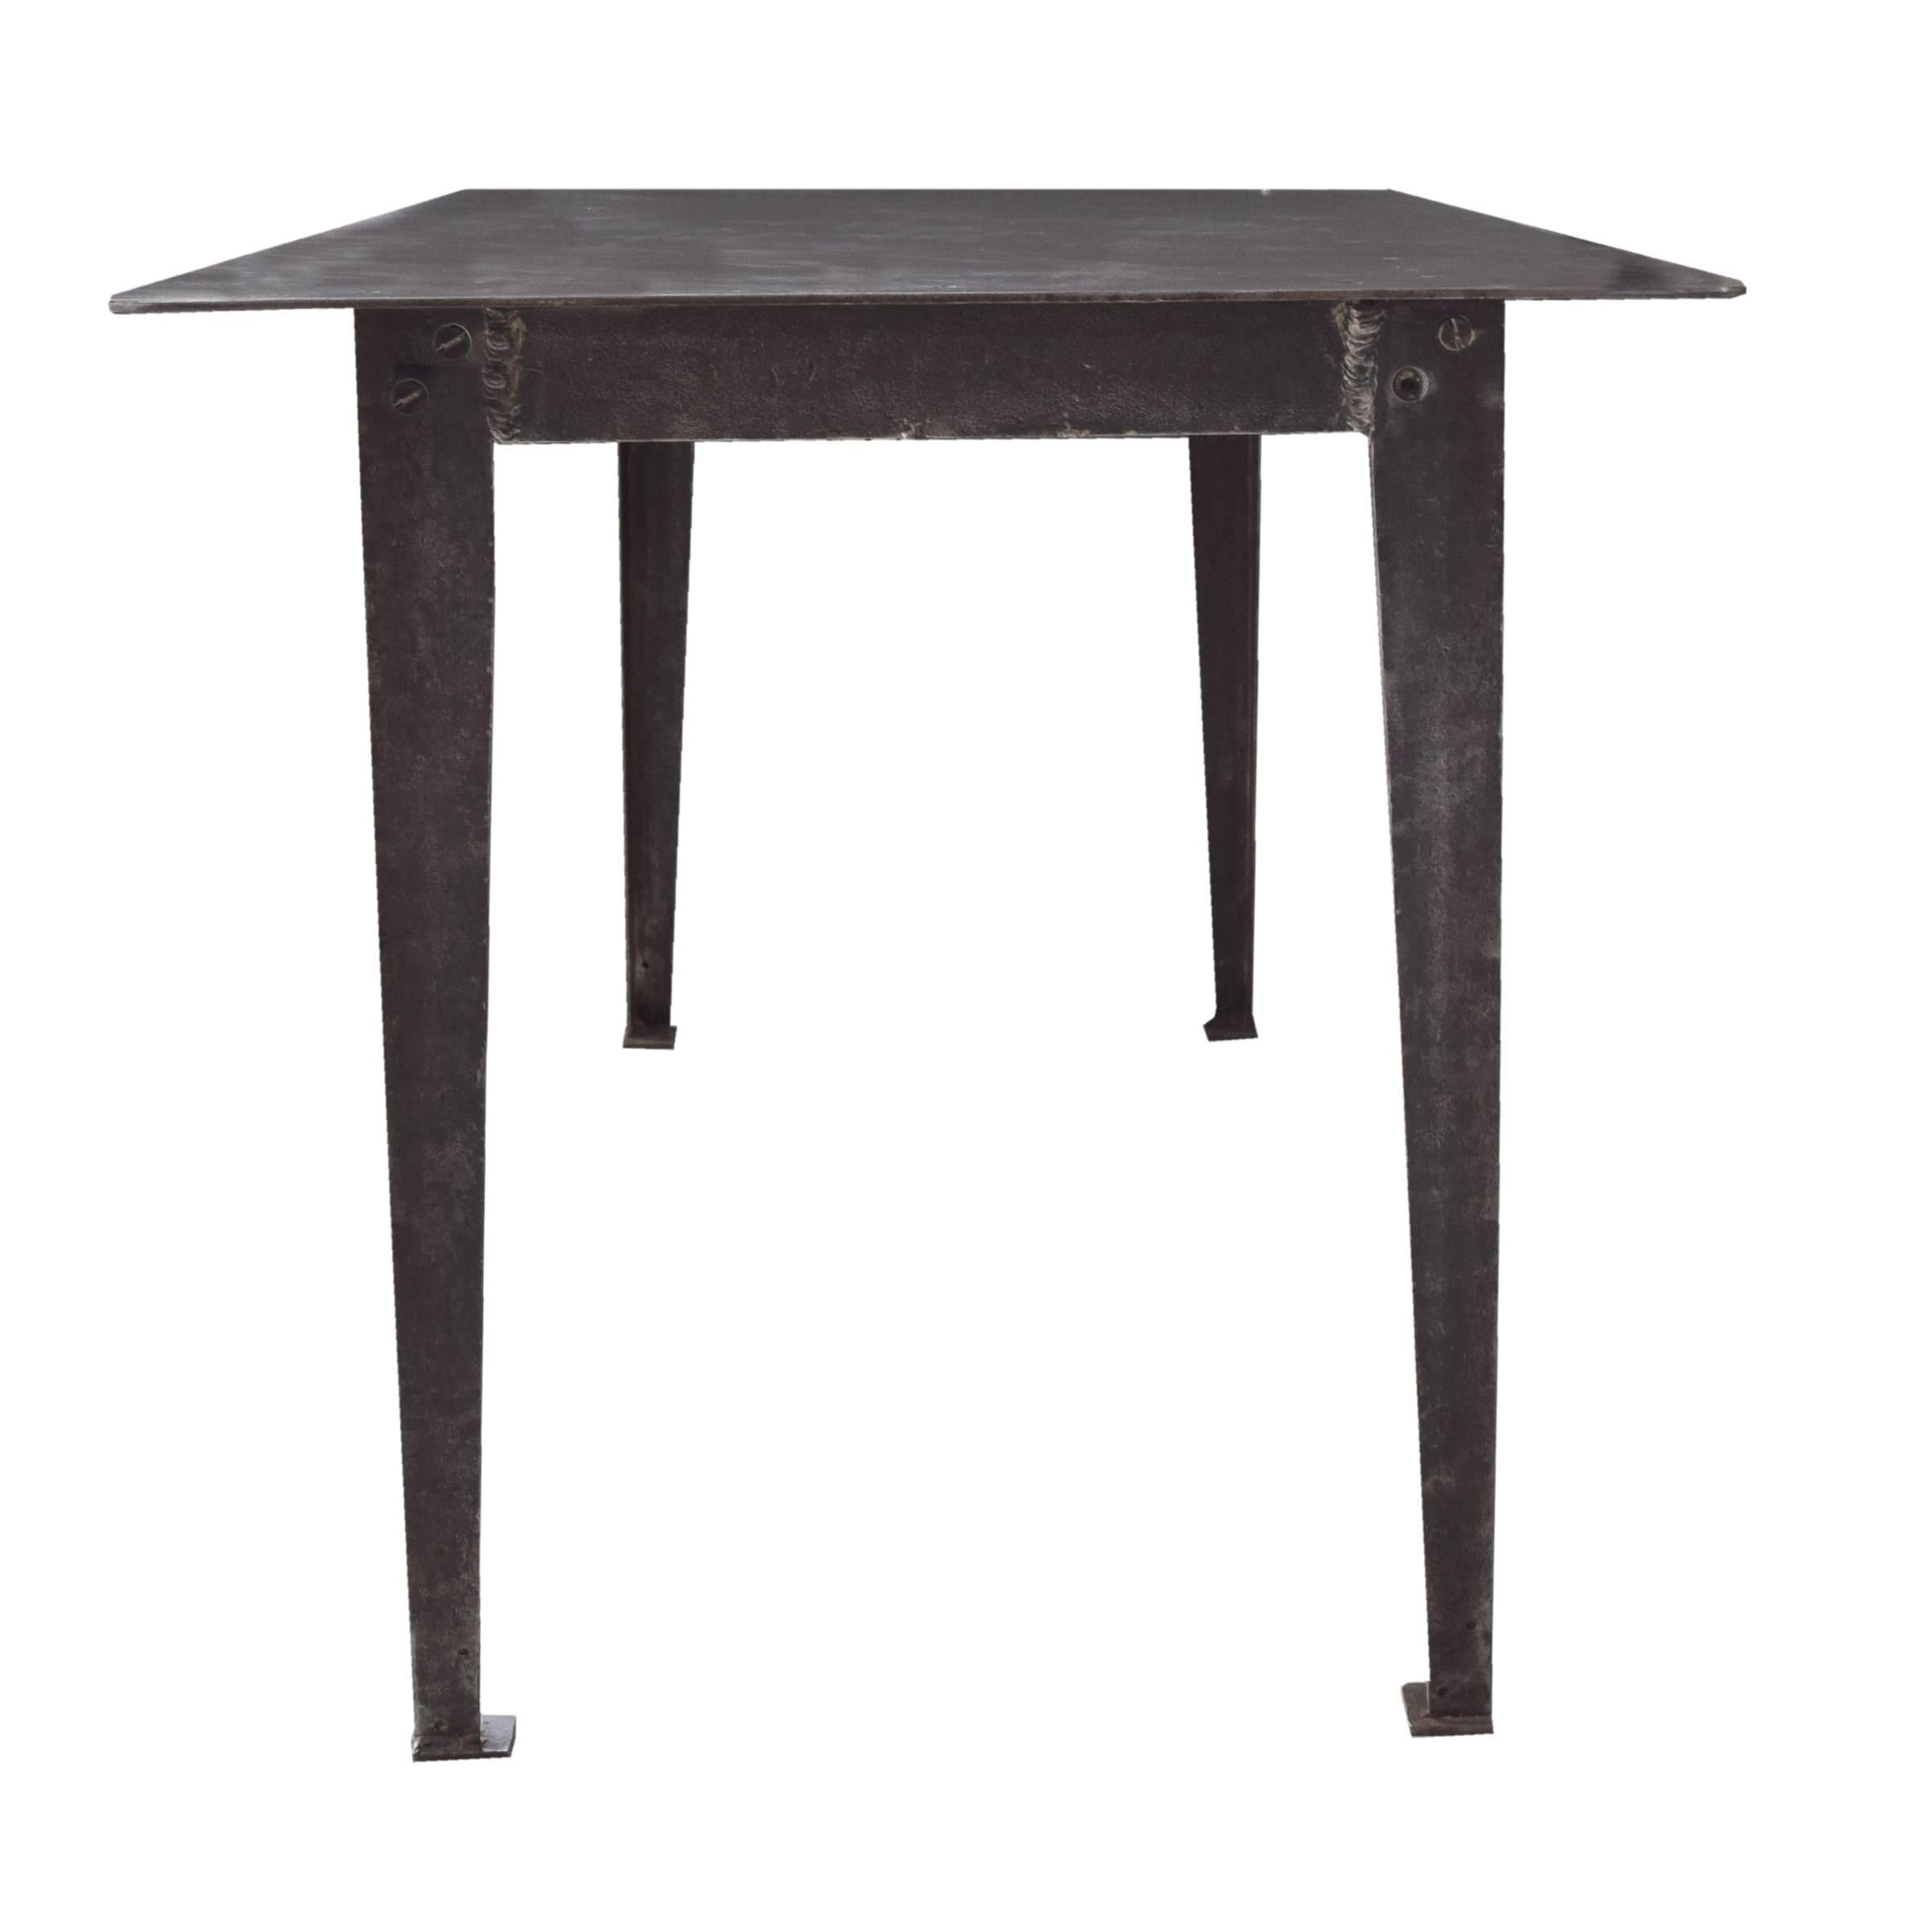 Industrial American Iron Table from the Premier Candy Co.